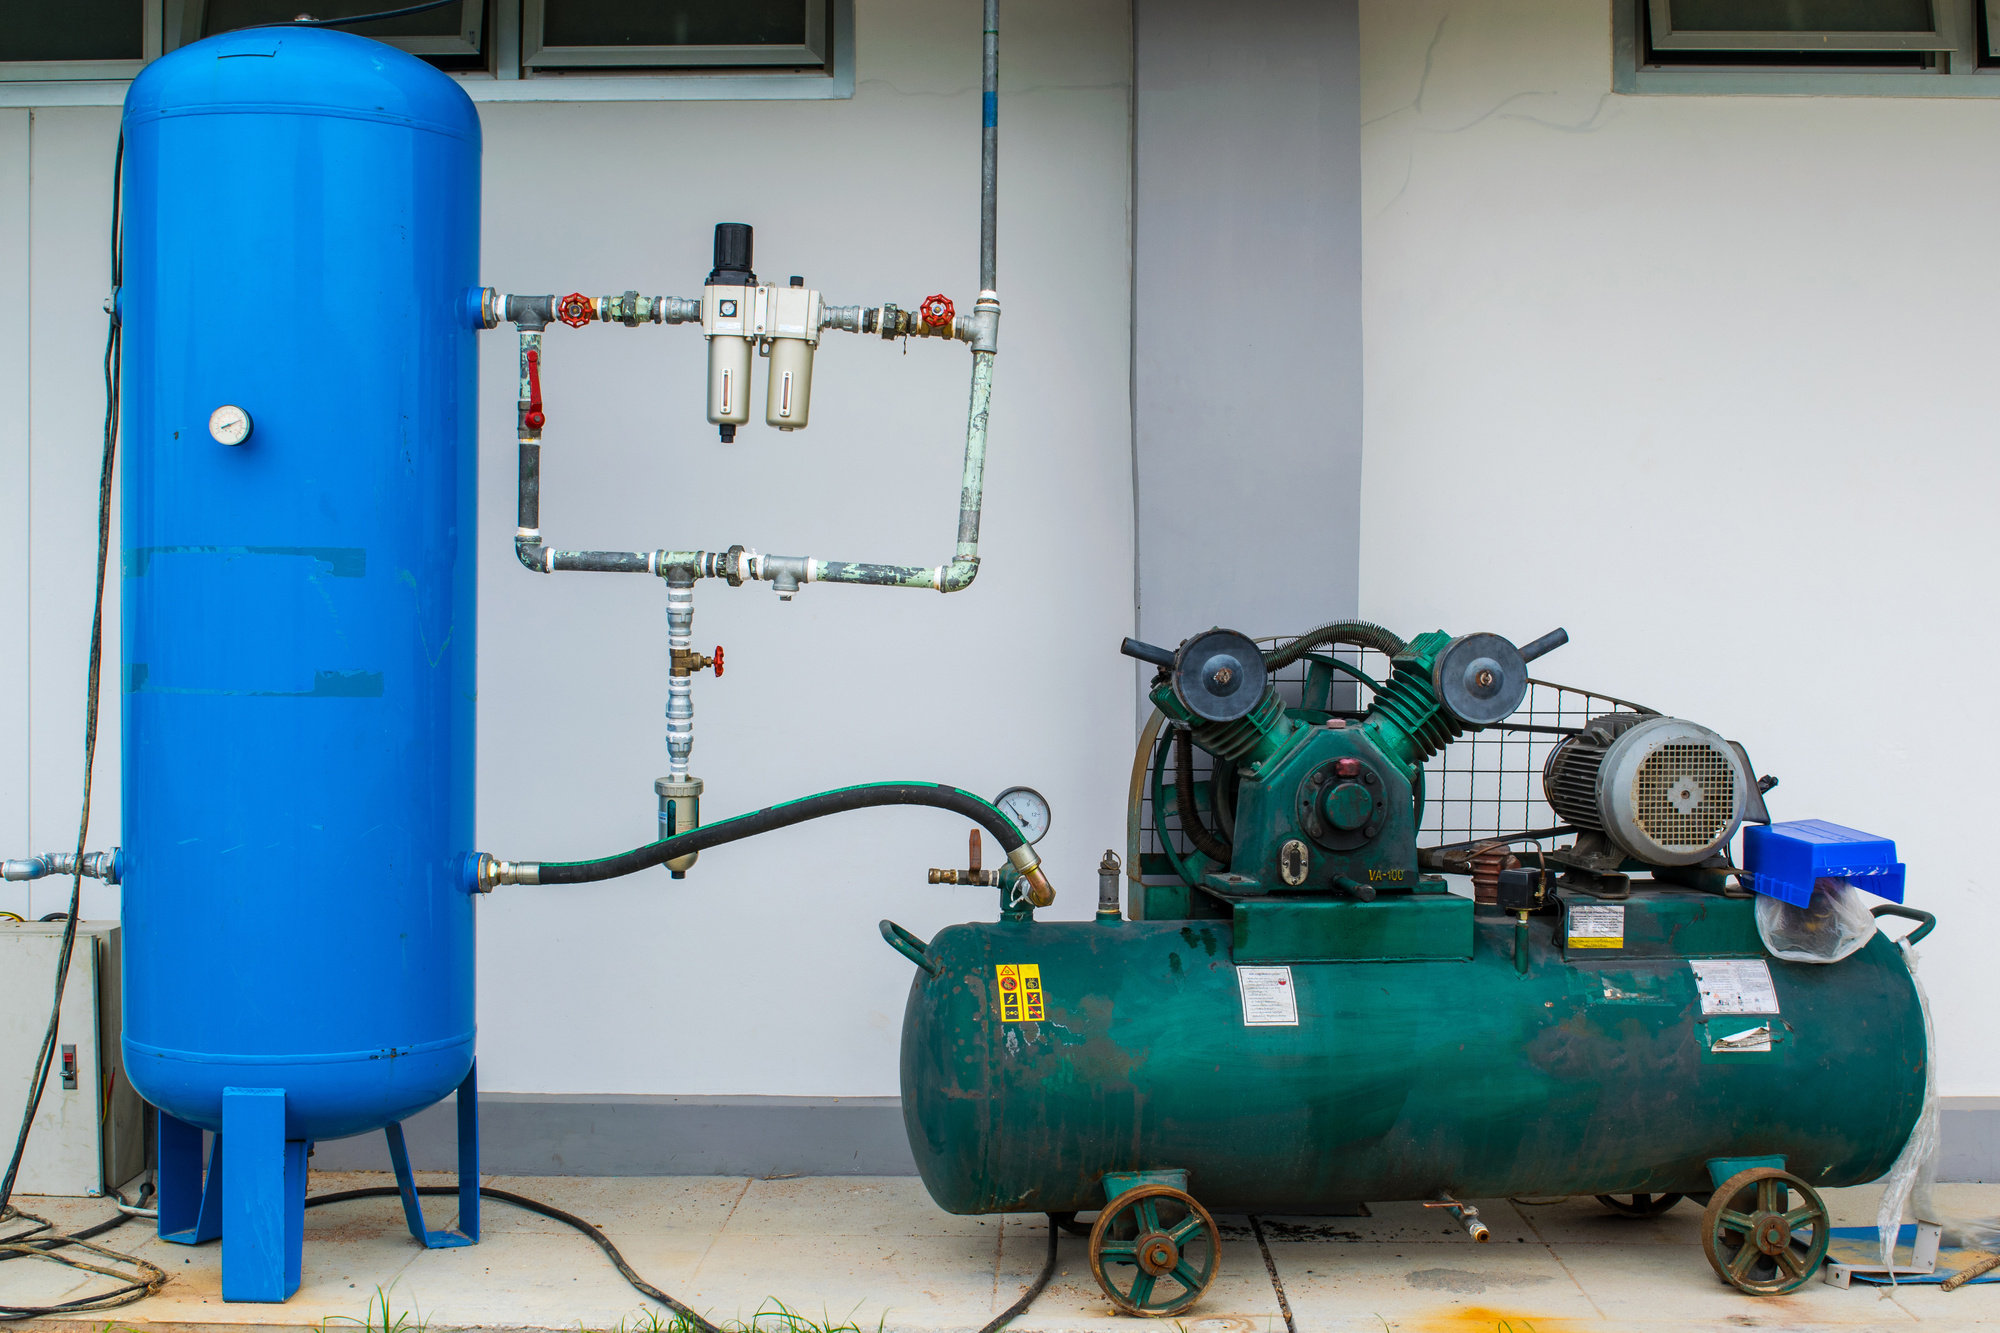 7 Benefits of Purchasing a Used Air Compressor